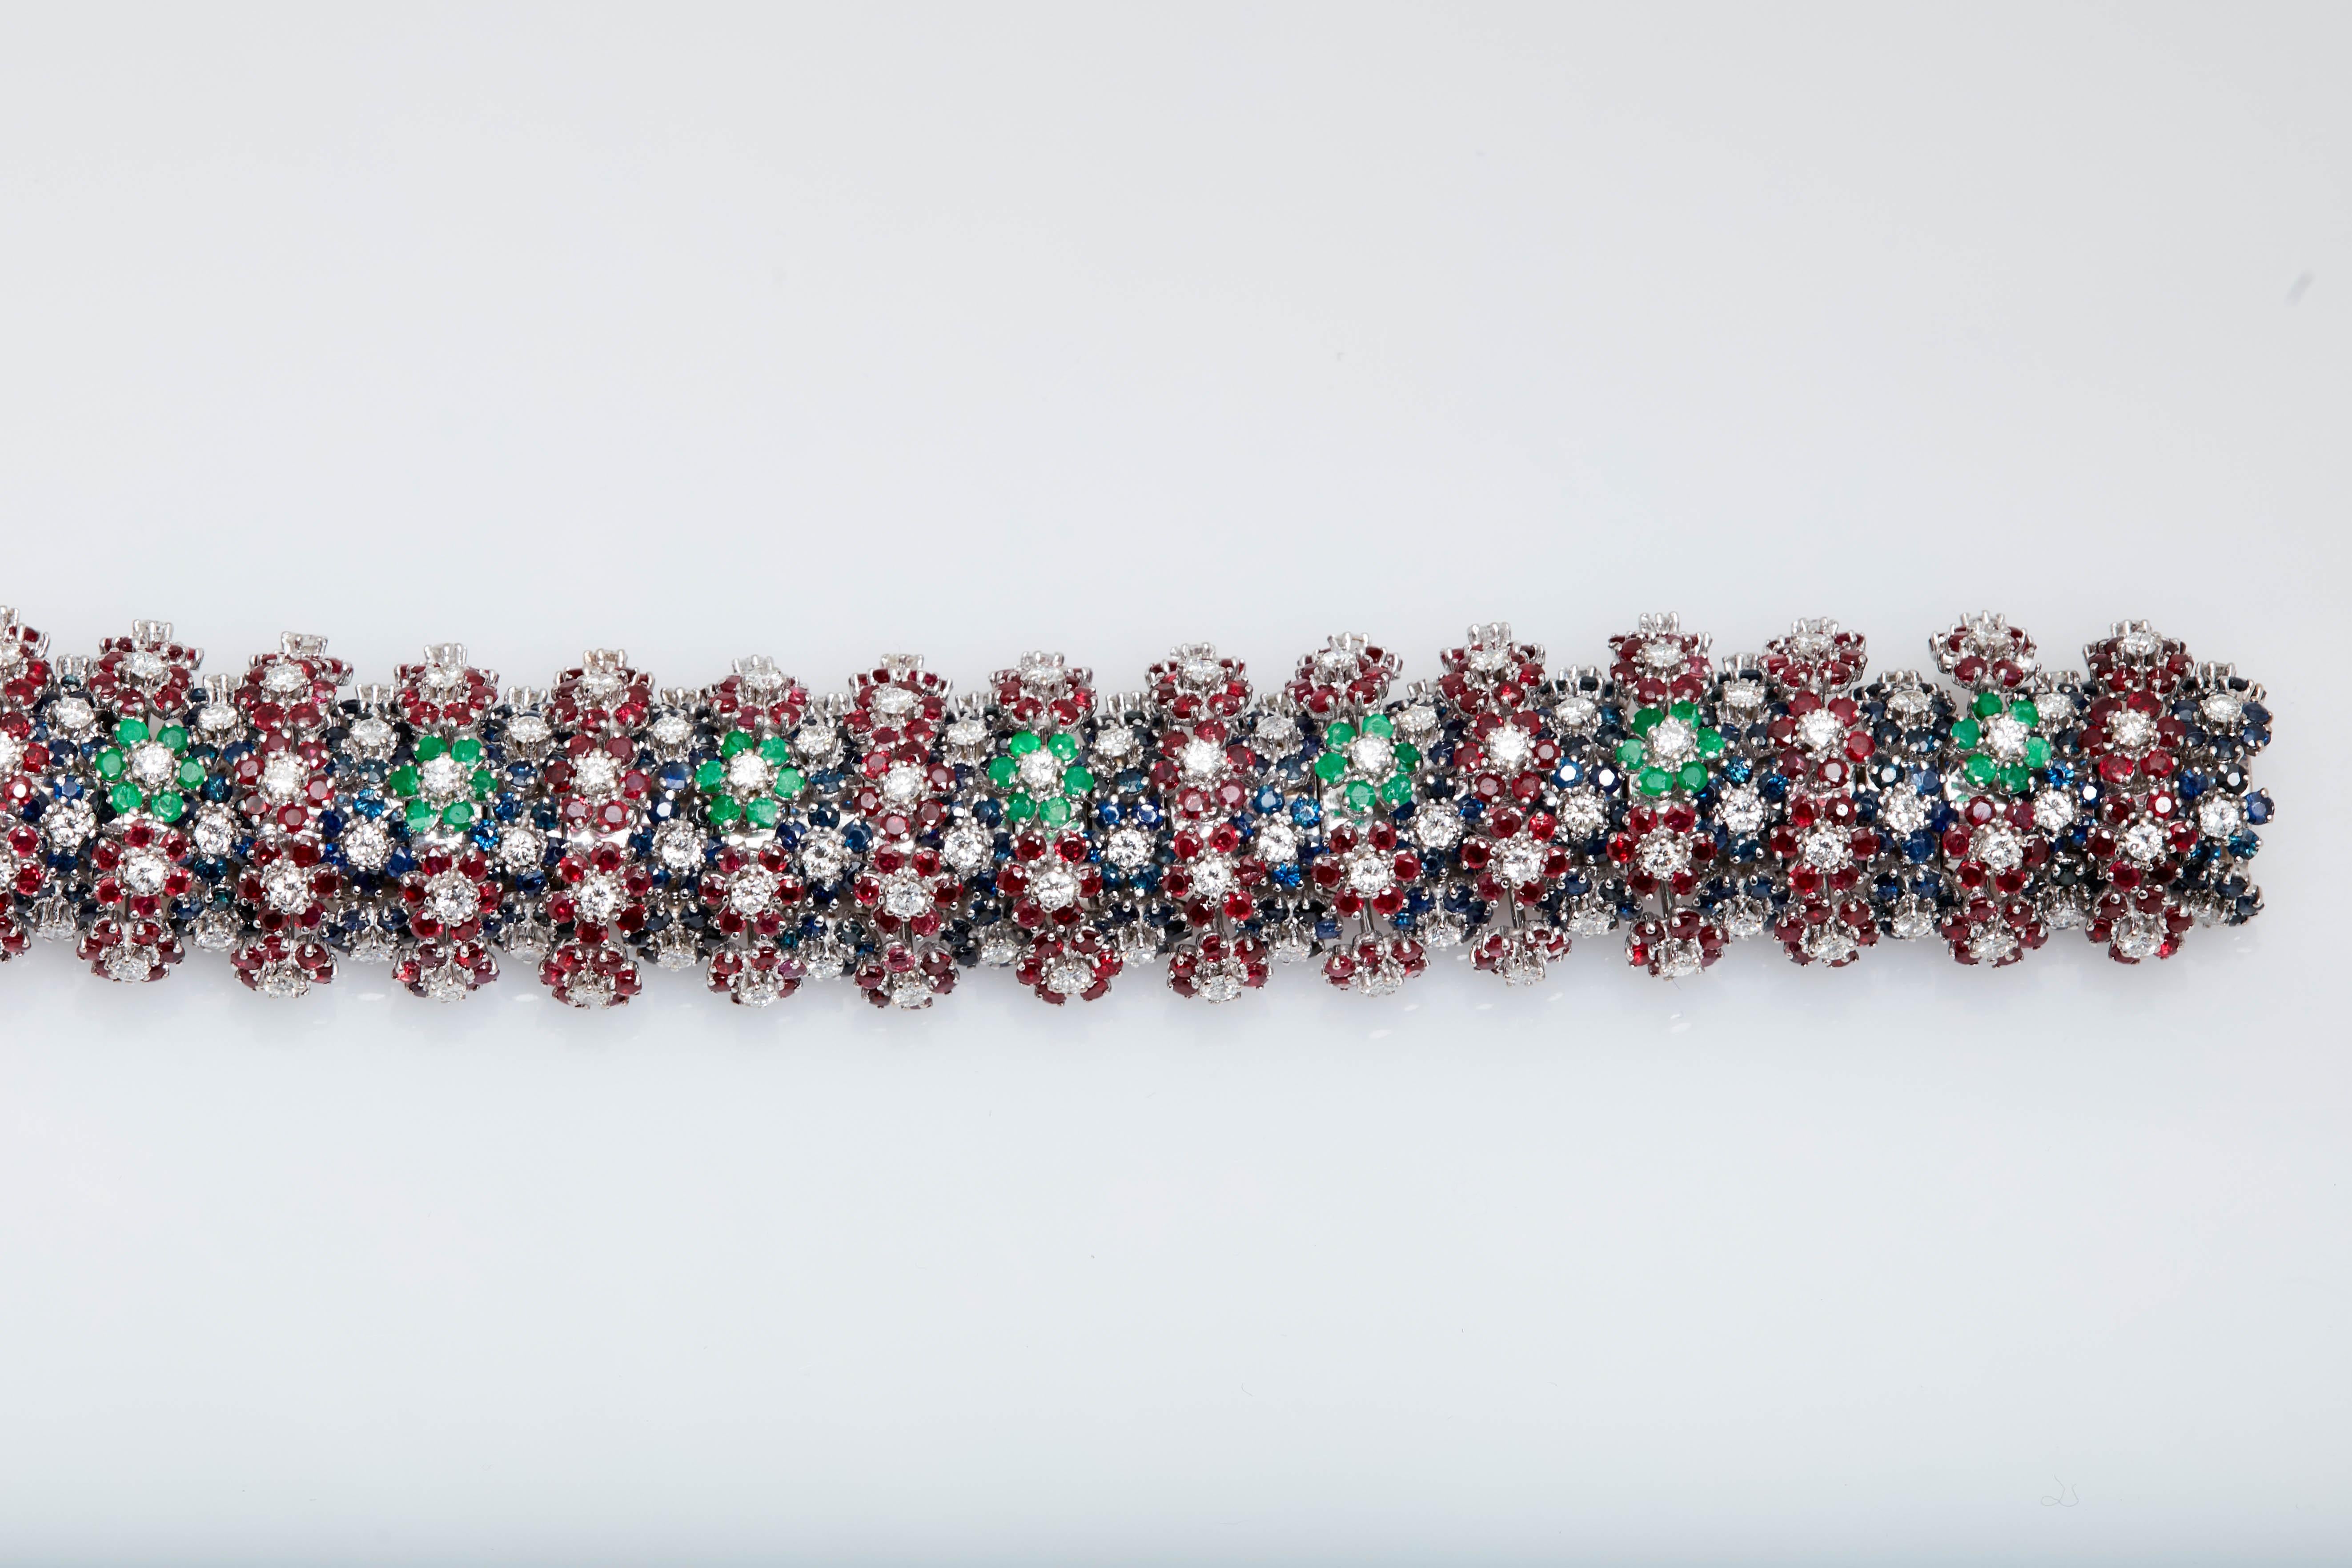 A colorful bracelet with round cut emeralds, rubies, sapphires, and diamonds, mounted on 18kt white gold. Signed by Sanz, an esteemed Spanish jeweler. Made in Spain, circa 1970s. 